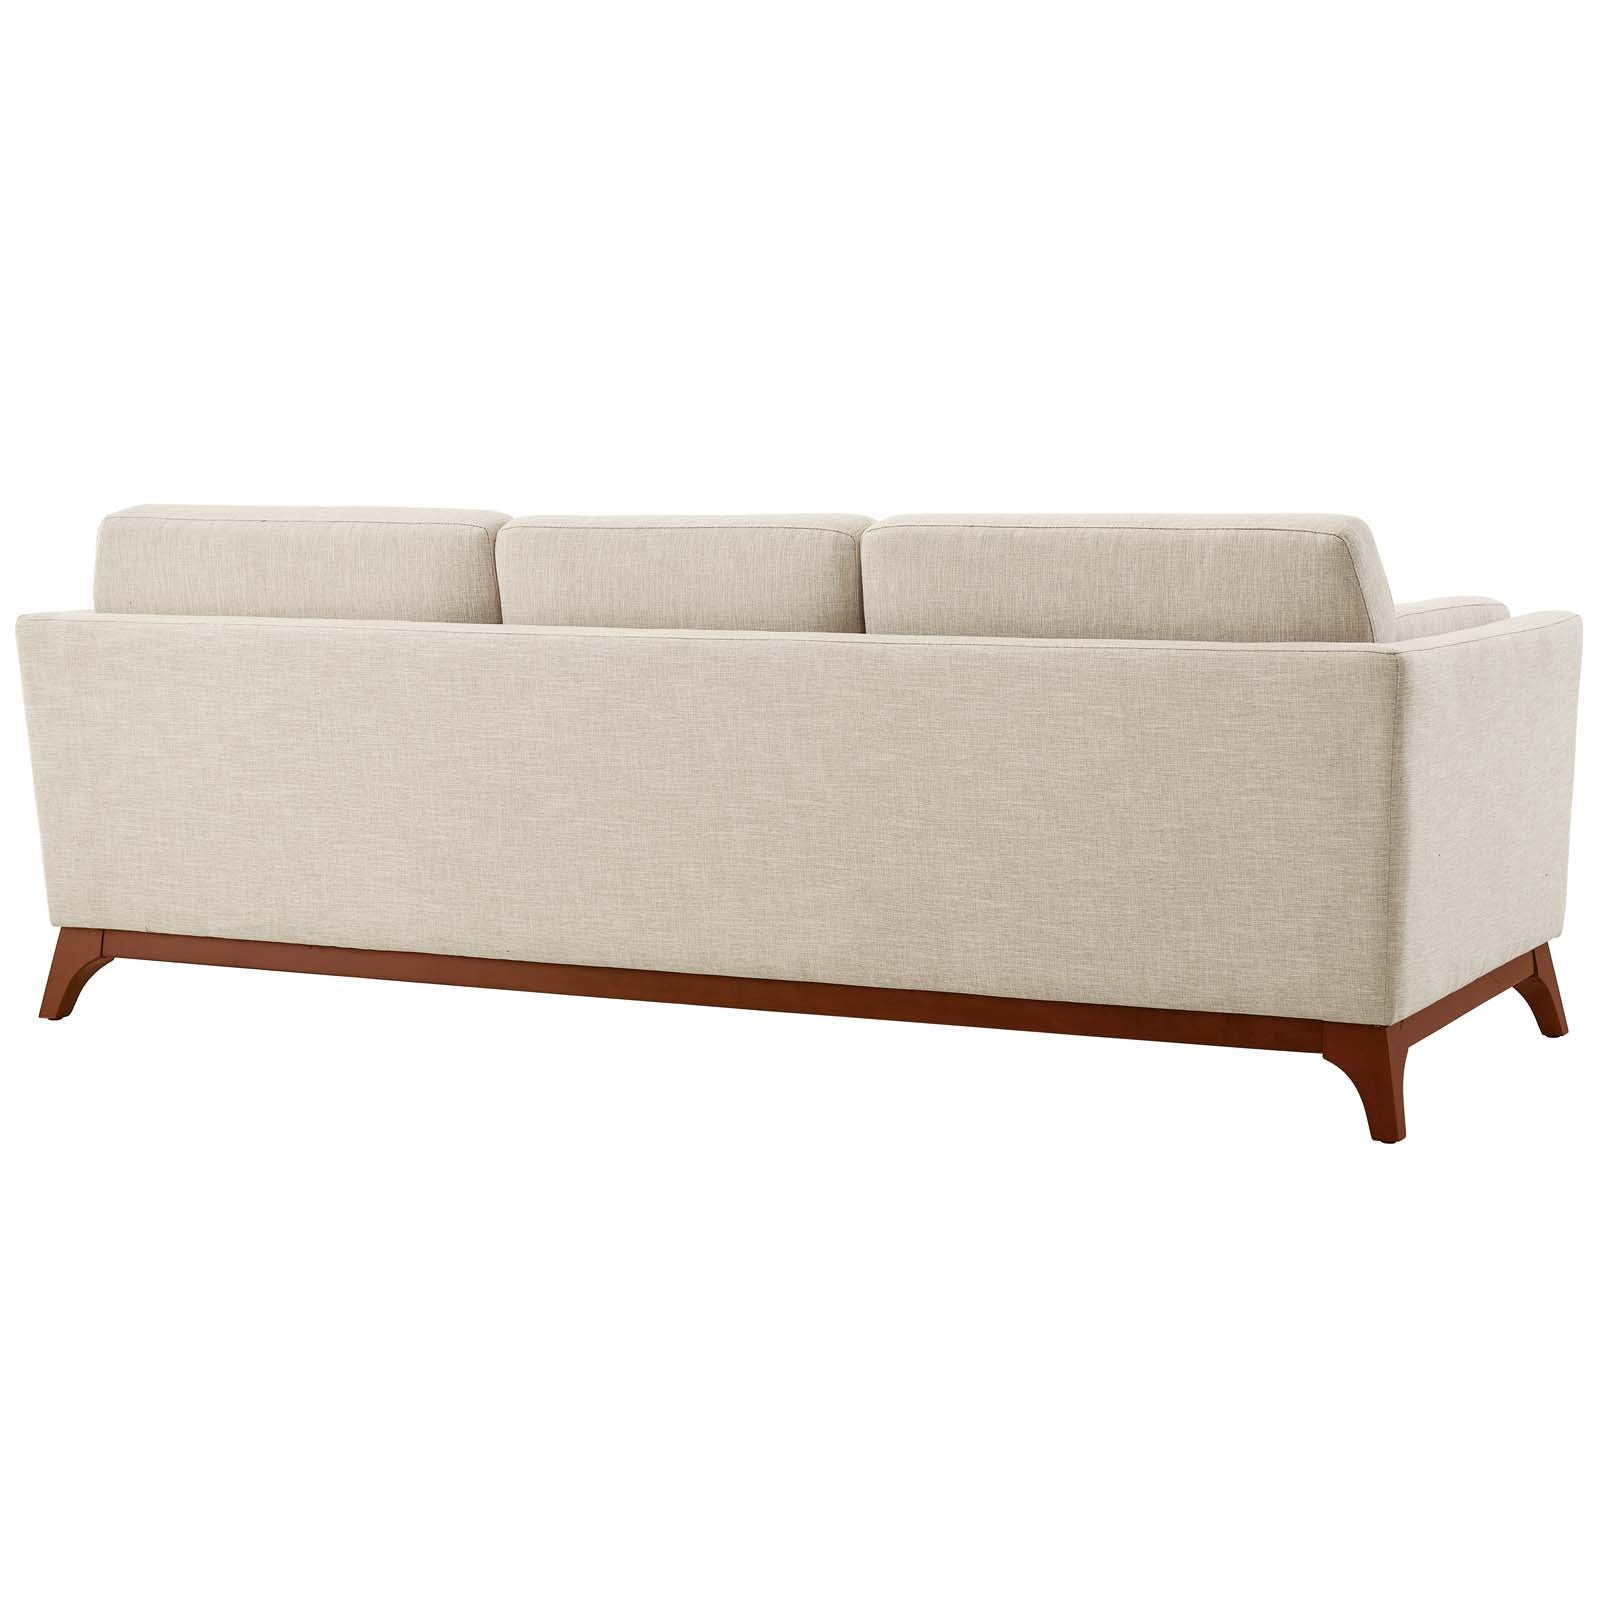 Modway Sofas & Couches - Chance Upholstered Fabric Sofa Beige